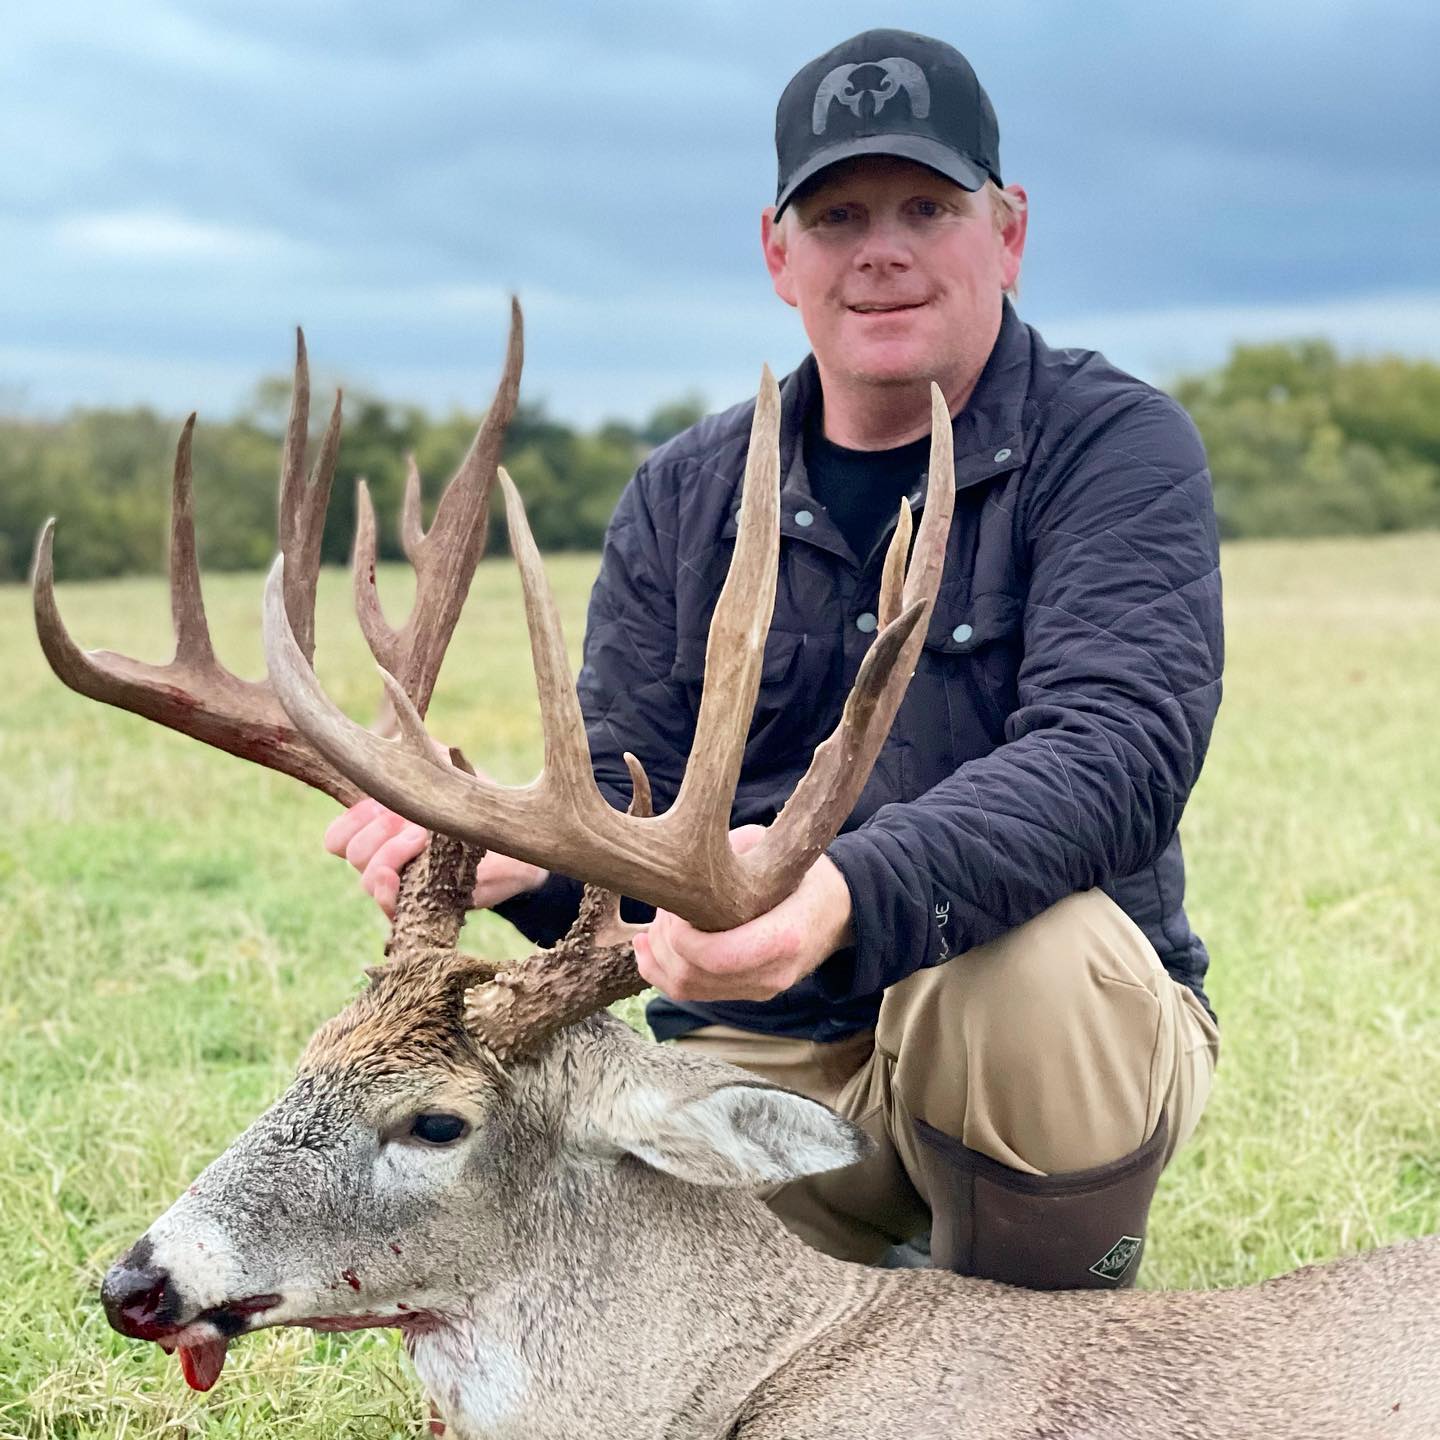 The Meadows buck scored 210 inches.